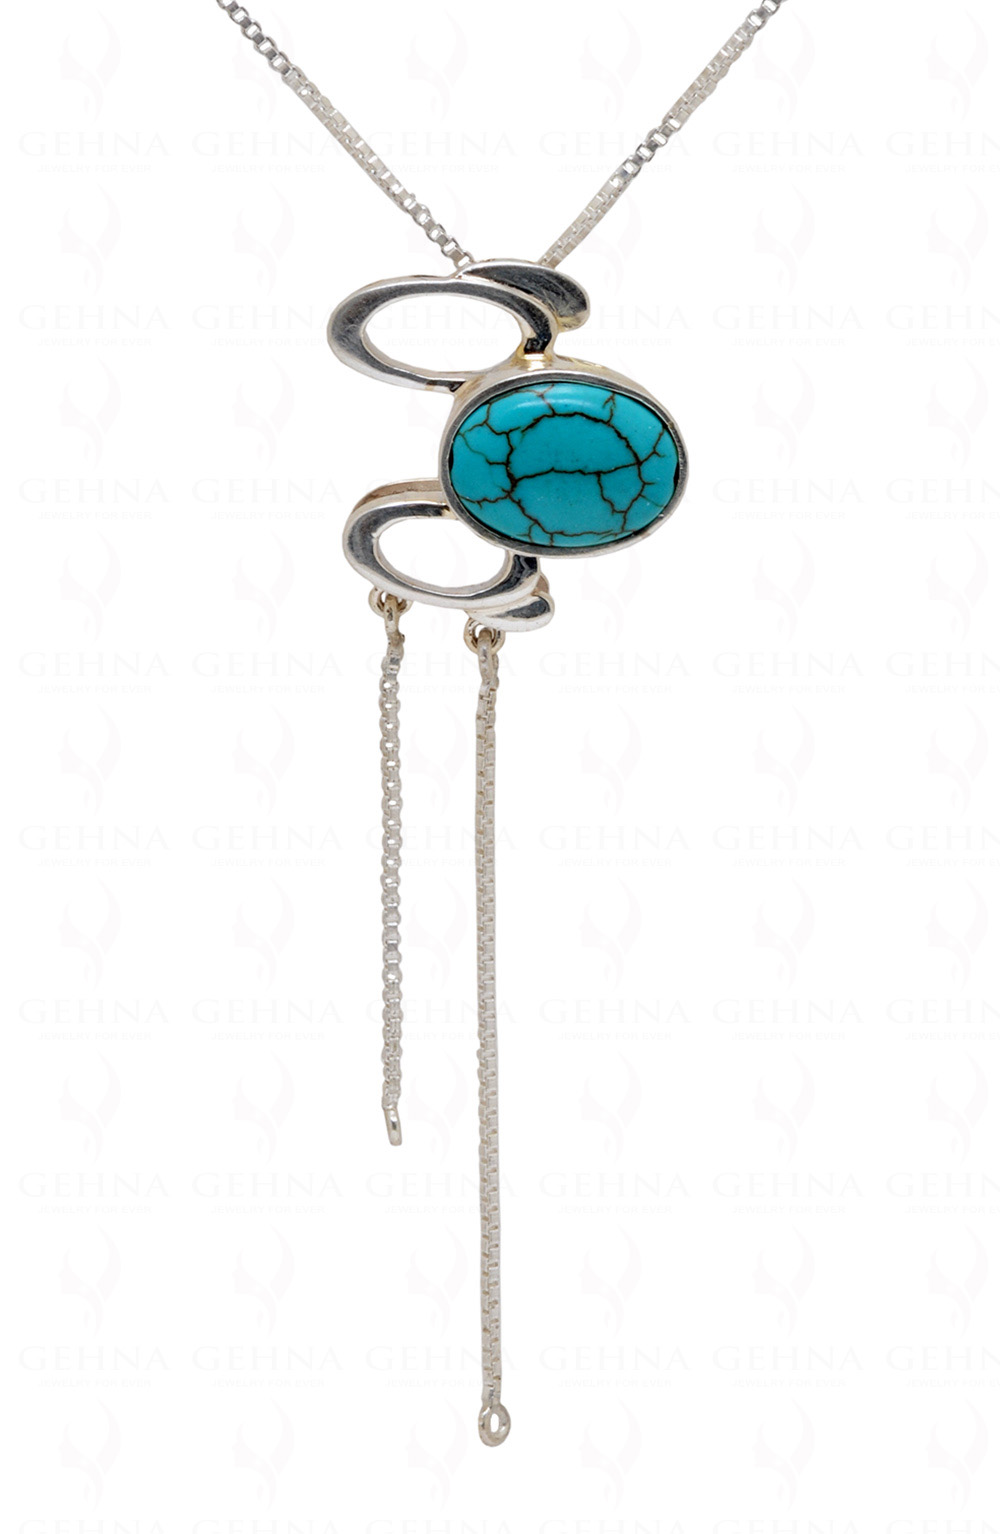 Silver Turquoise Pendant Necklace - Malouf on the Plaza